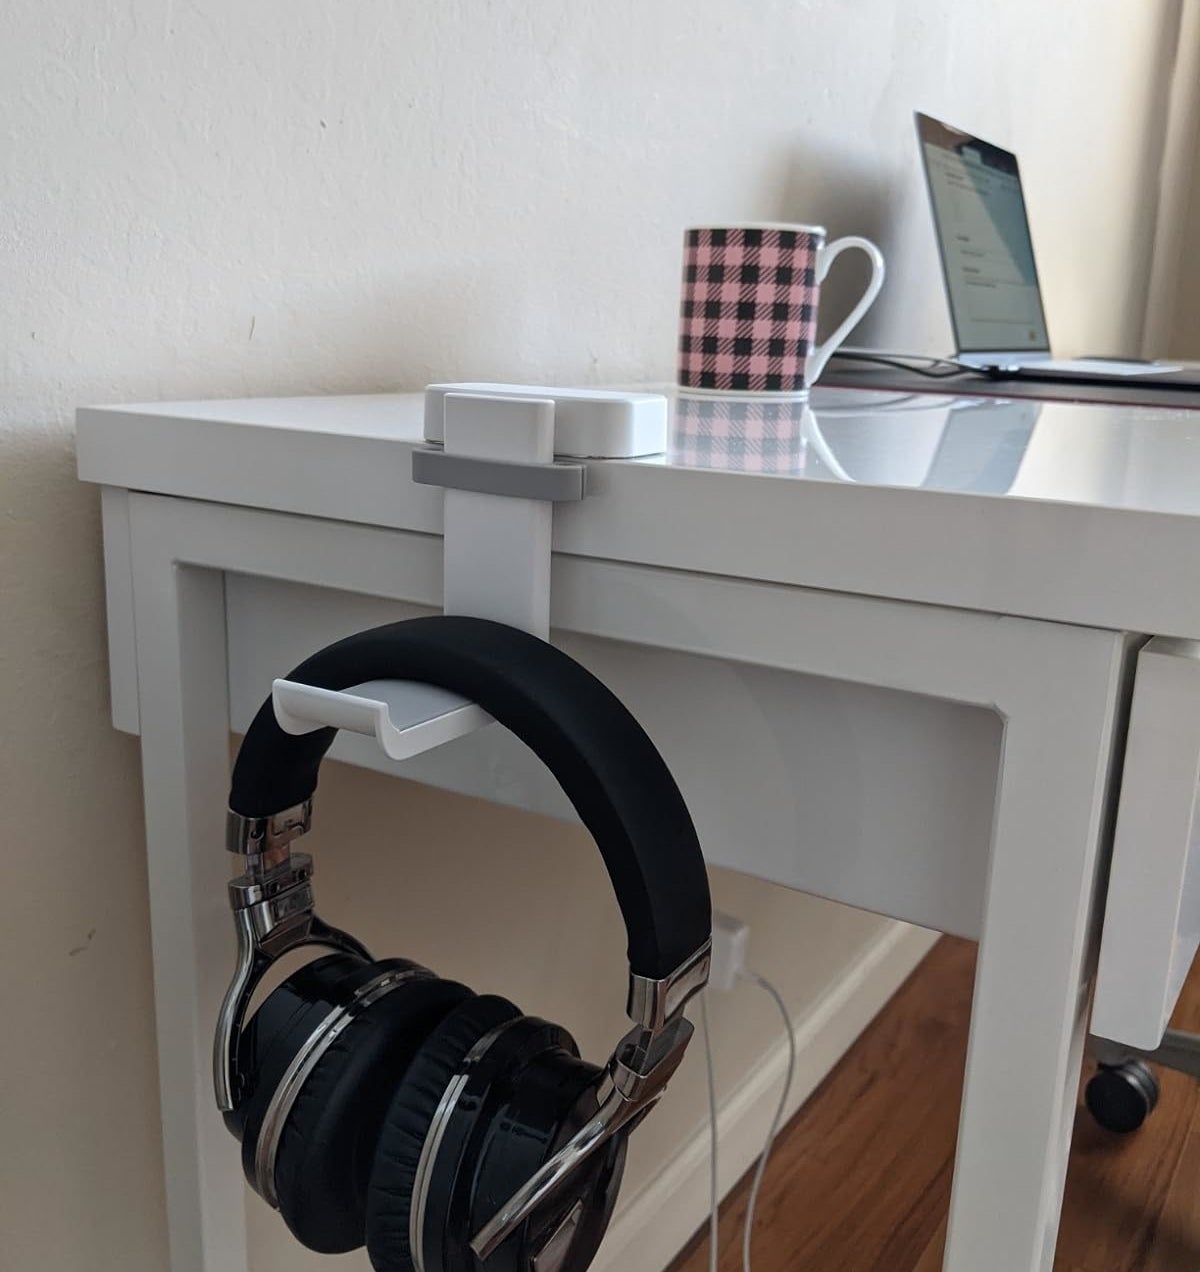 Headphones hanging on a desk edge near a checkered mug and a laptop partially visible